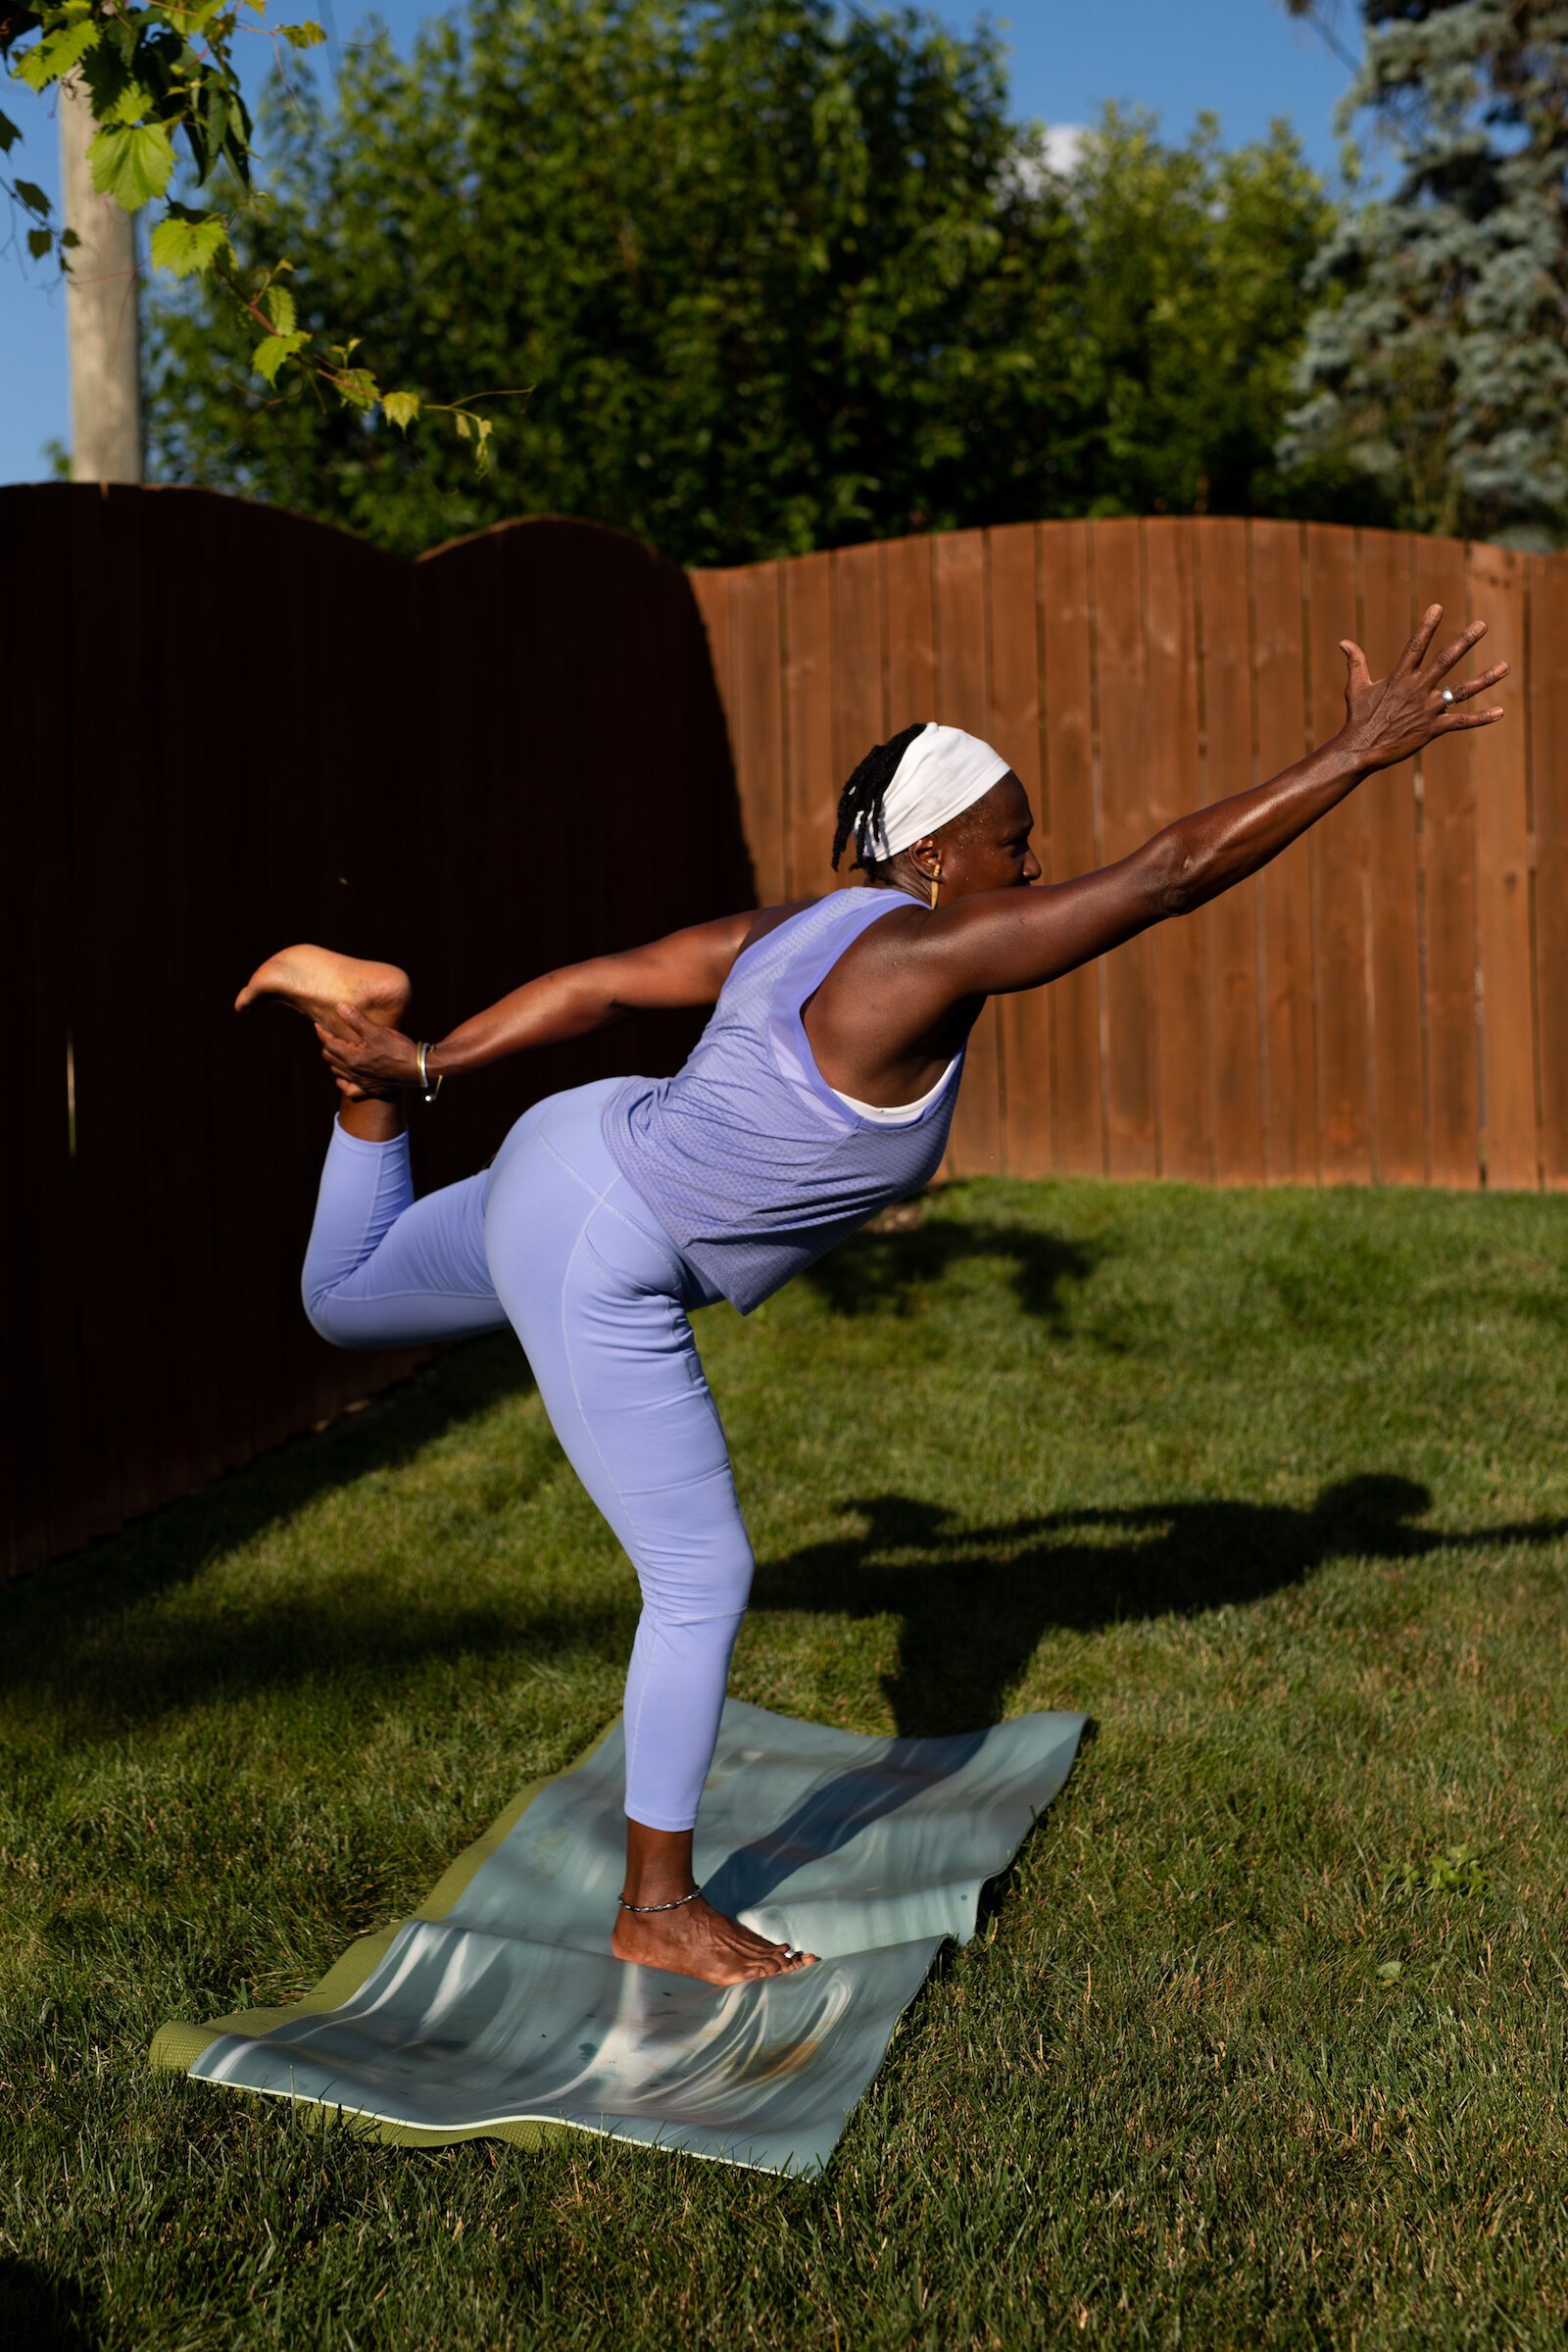 Diane Rogers, a longtime resident and current President of the Oxford Community Association, leads a yoga class in her backyard for her neighborhood and community drop-ins.